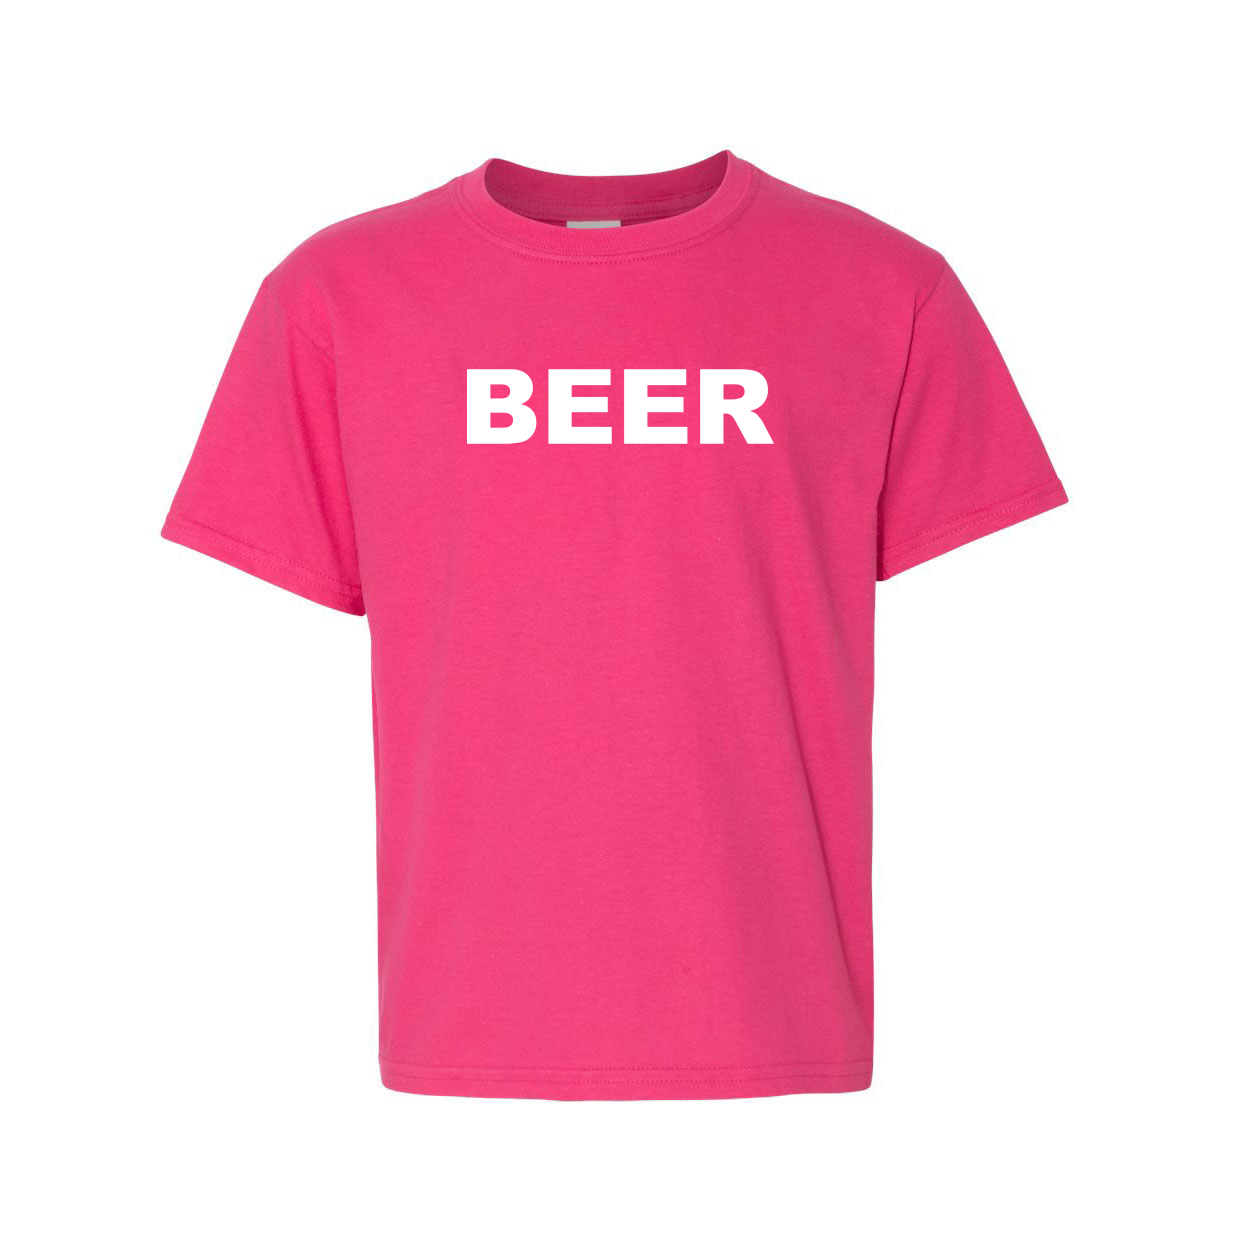 Beer Brand Logo Classic Youth T-Shirt Pink